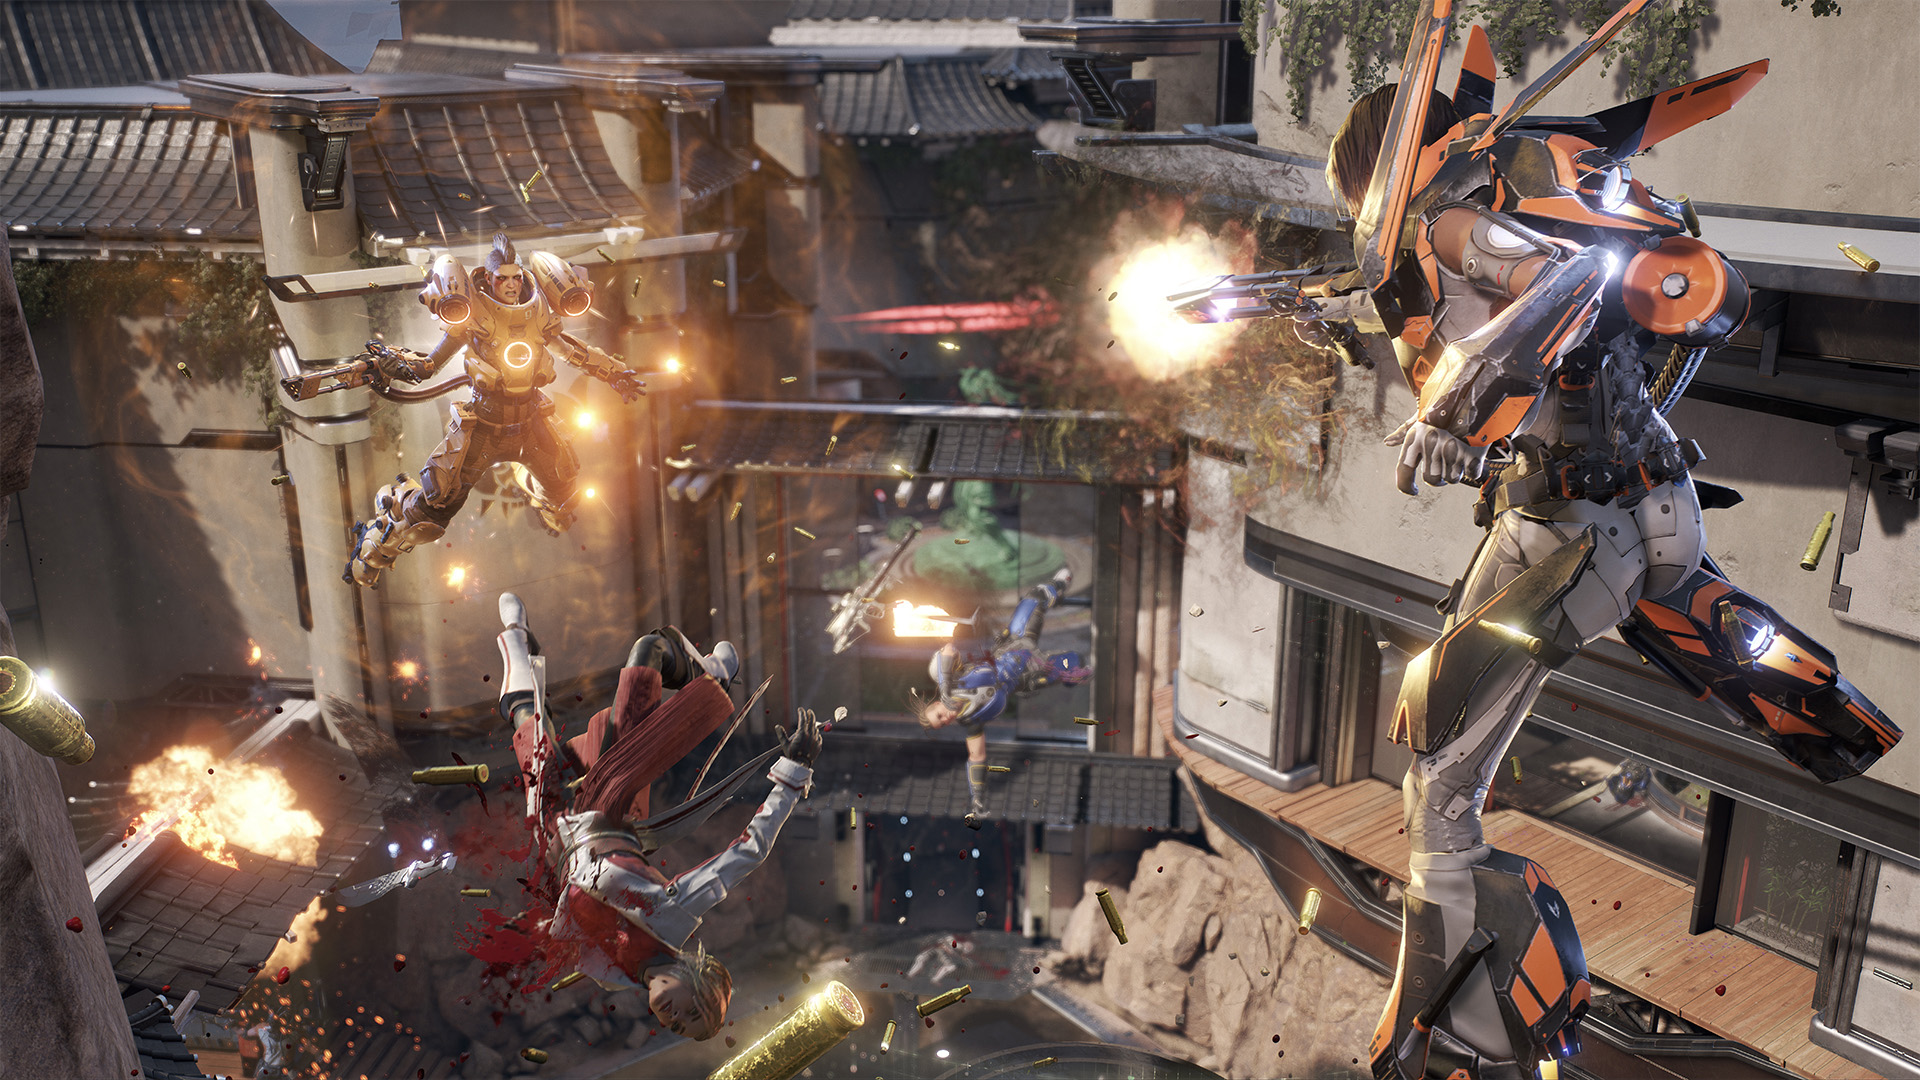 Boss Key Productions Talks About The Future For Lawbreakers